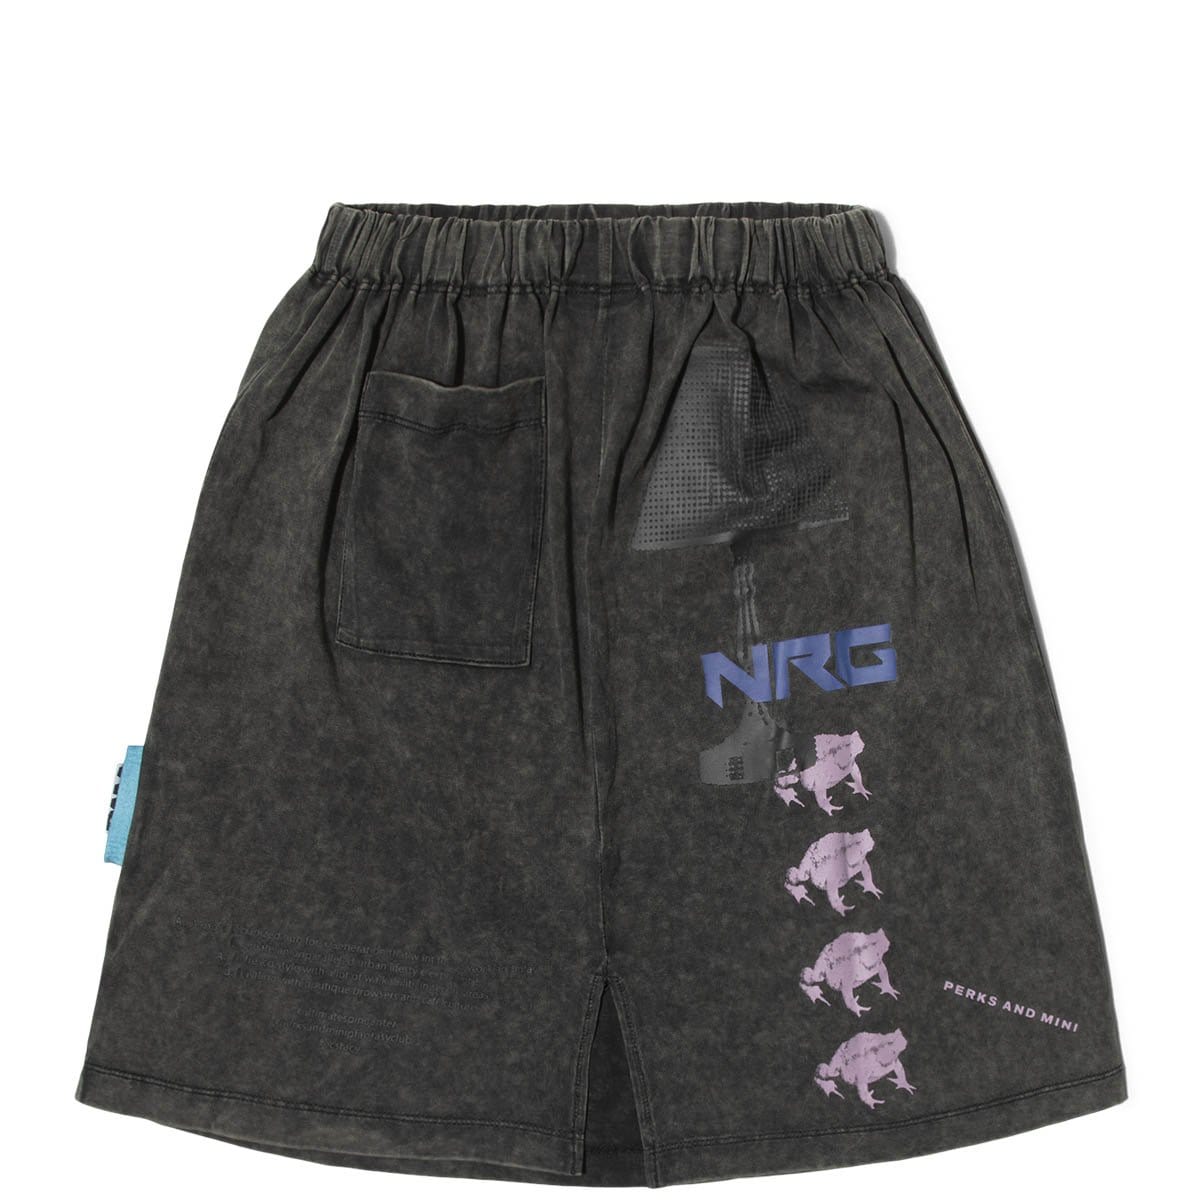 Perks and Mini Women's Freshly Painted Jersey Skirt Wet Cement